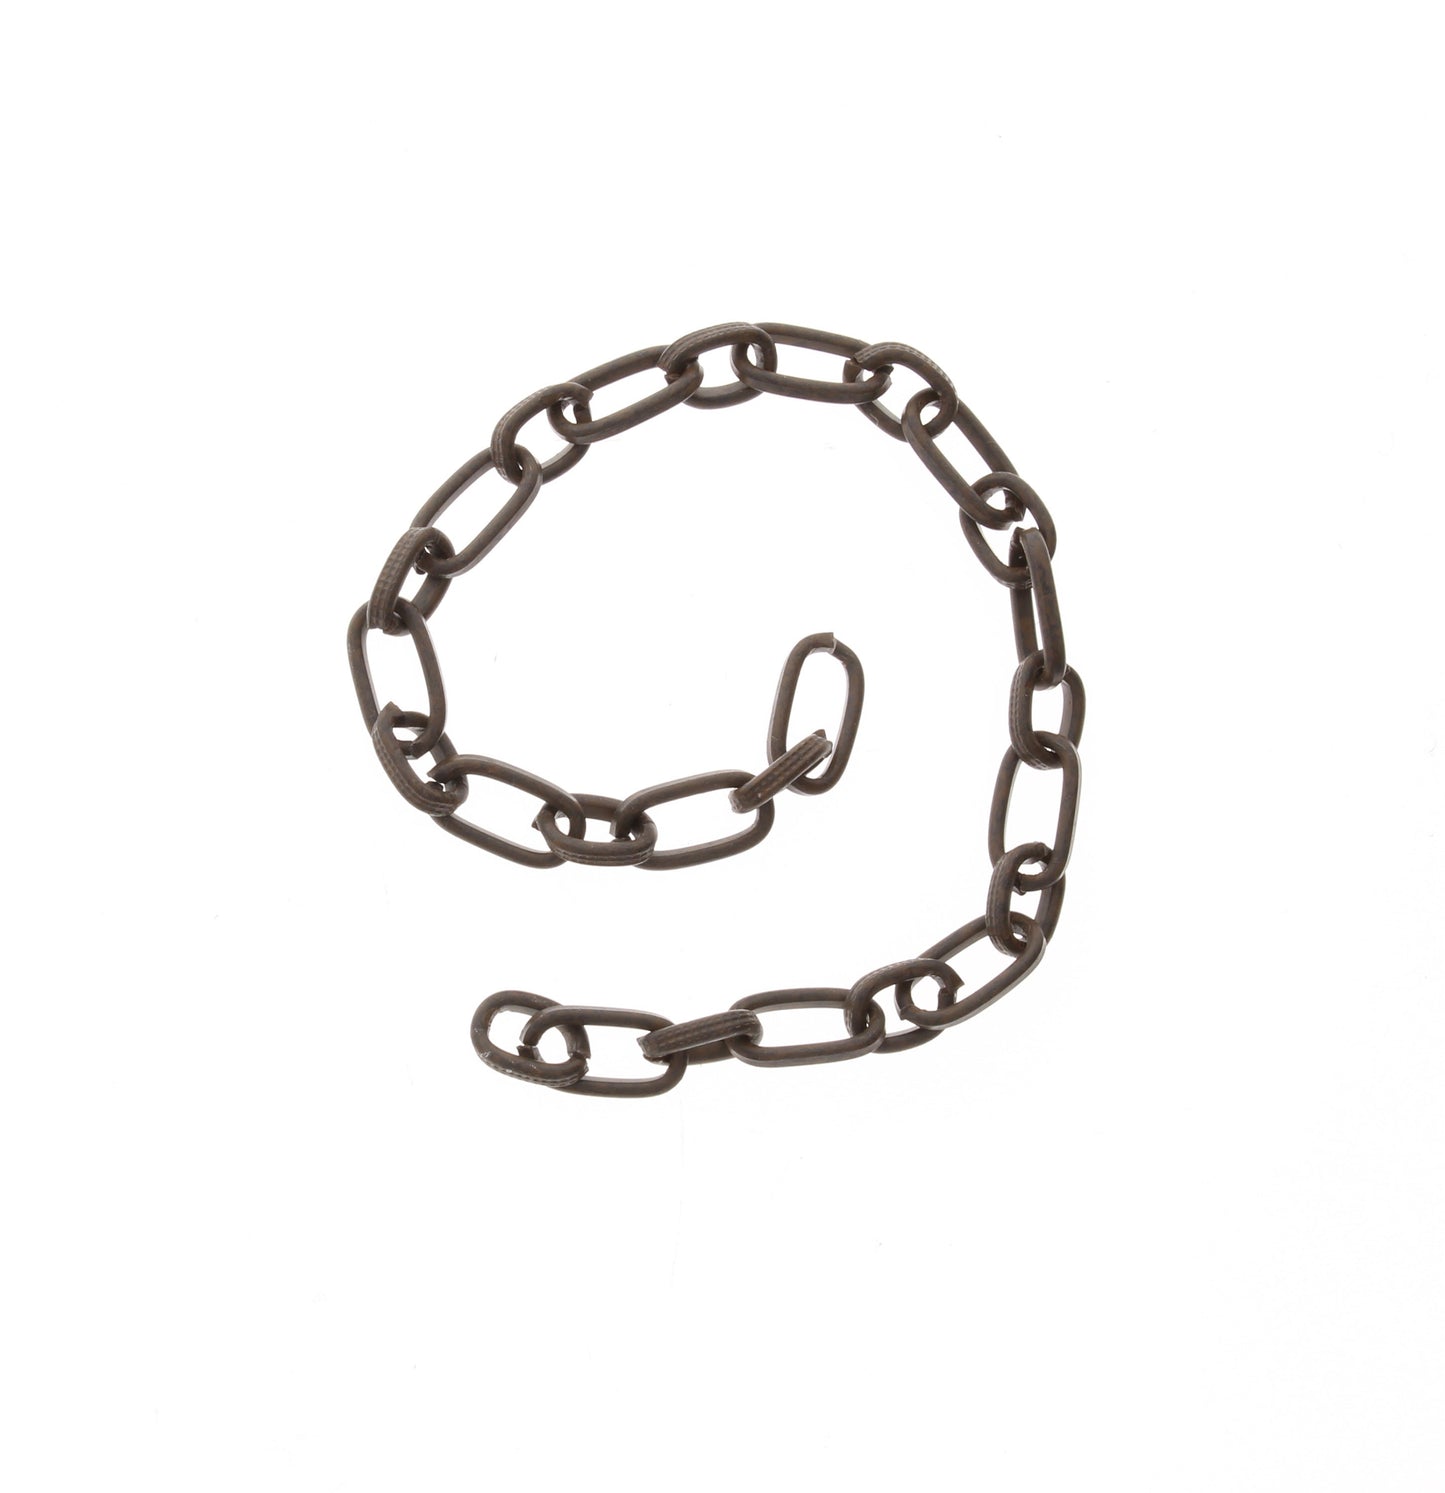 Cable chain necklace, 11x6-8x6mm Heavy Long & Short Footage Cable Chain, 18" Necklace, Each